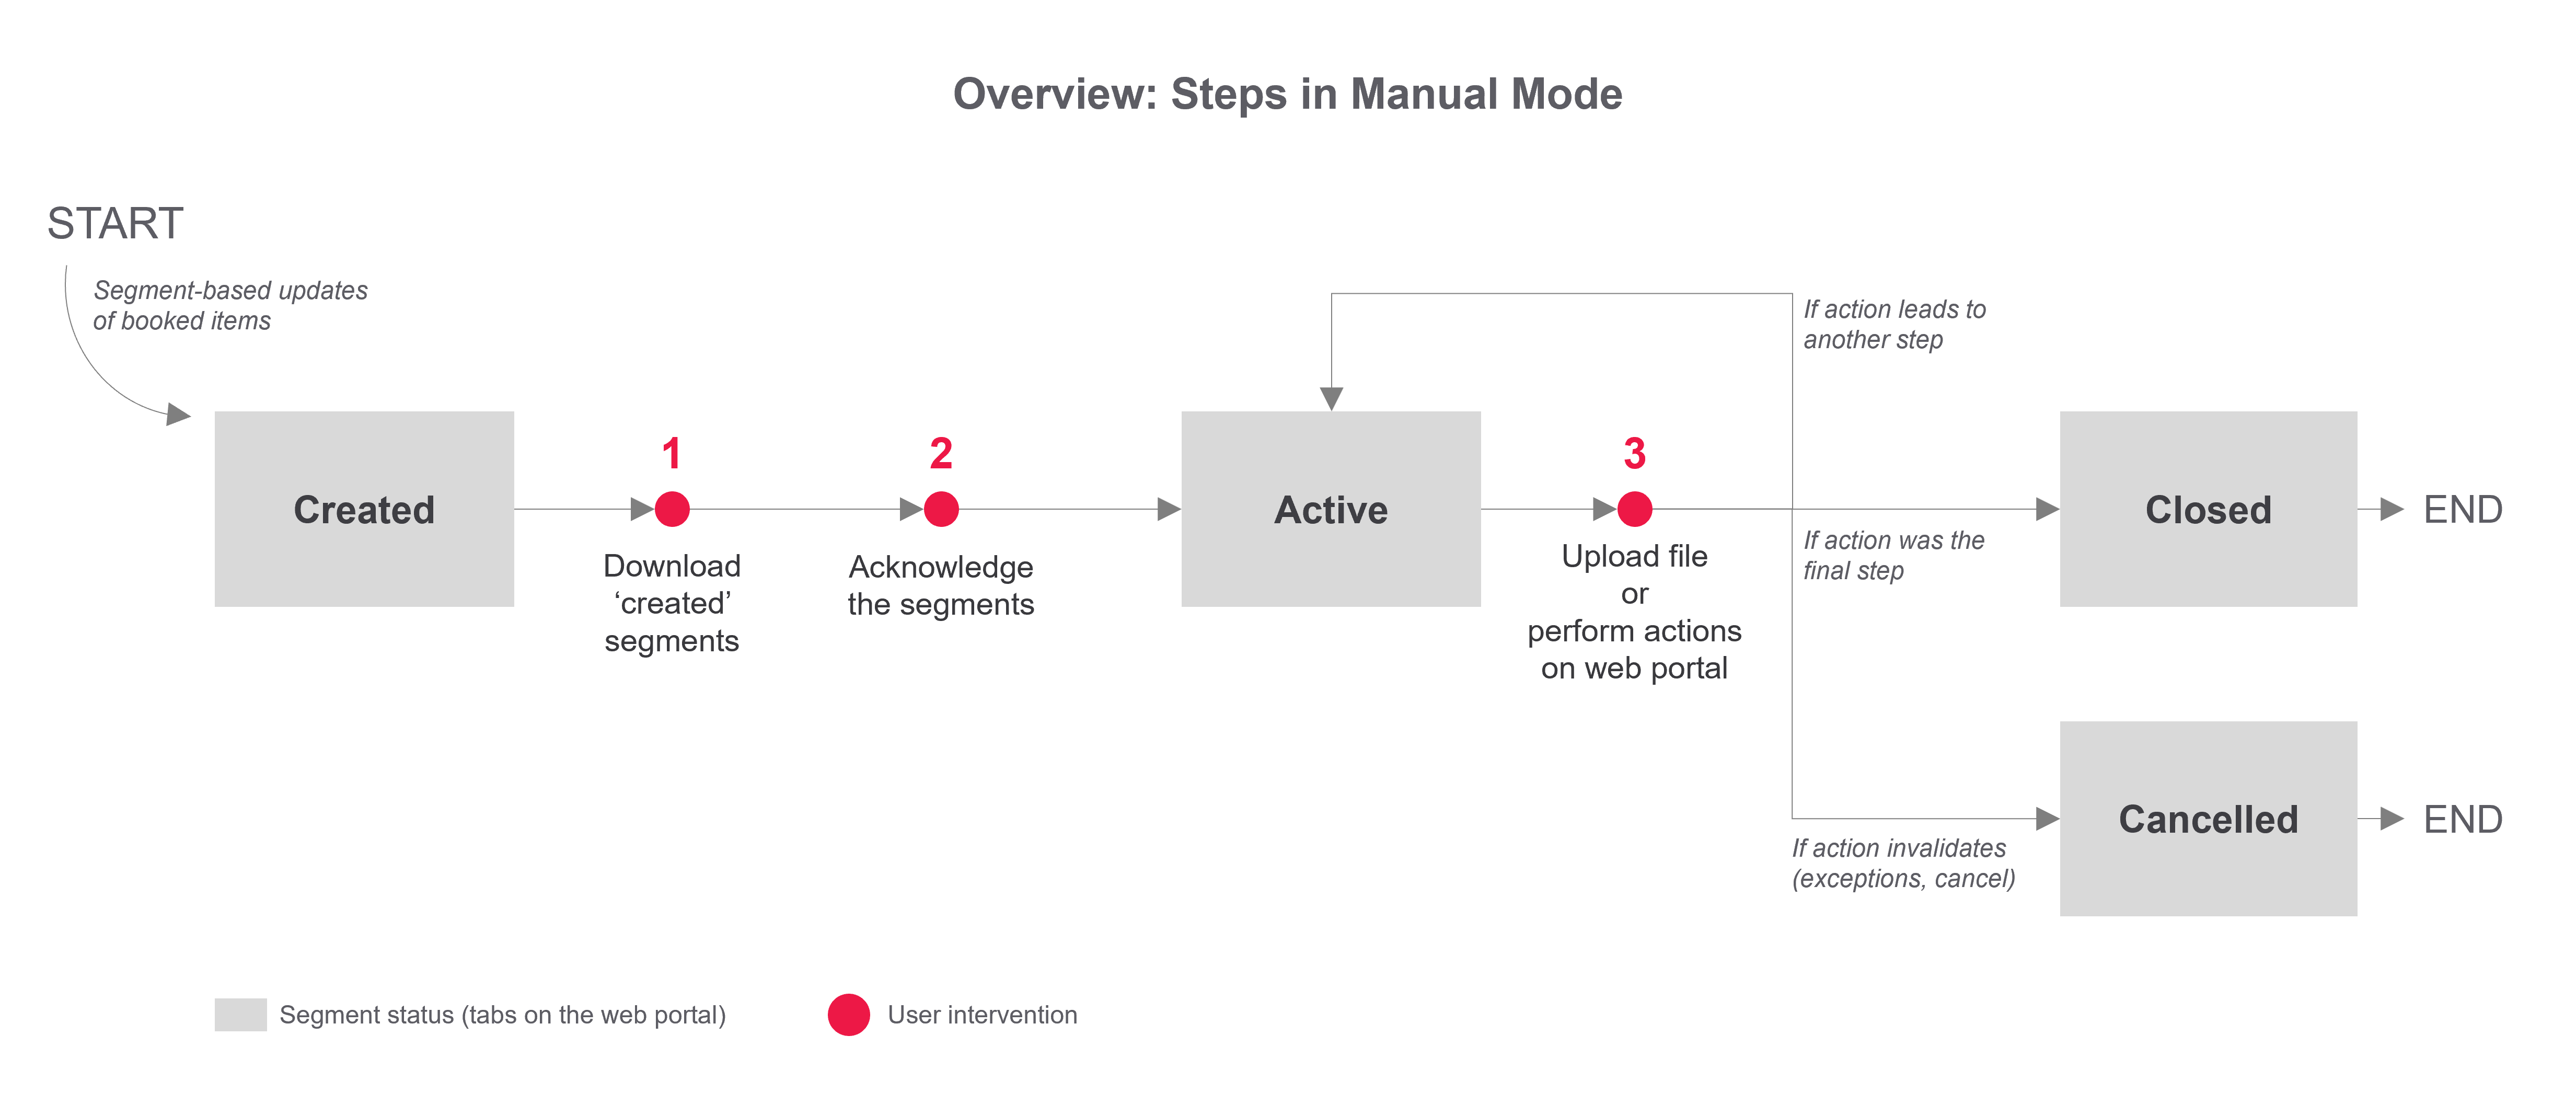 How Manual Mode Works. Image for illustration purposes only.